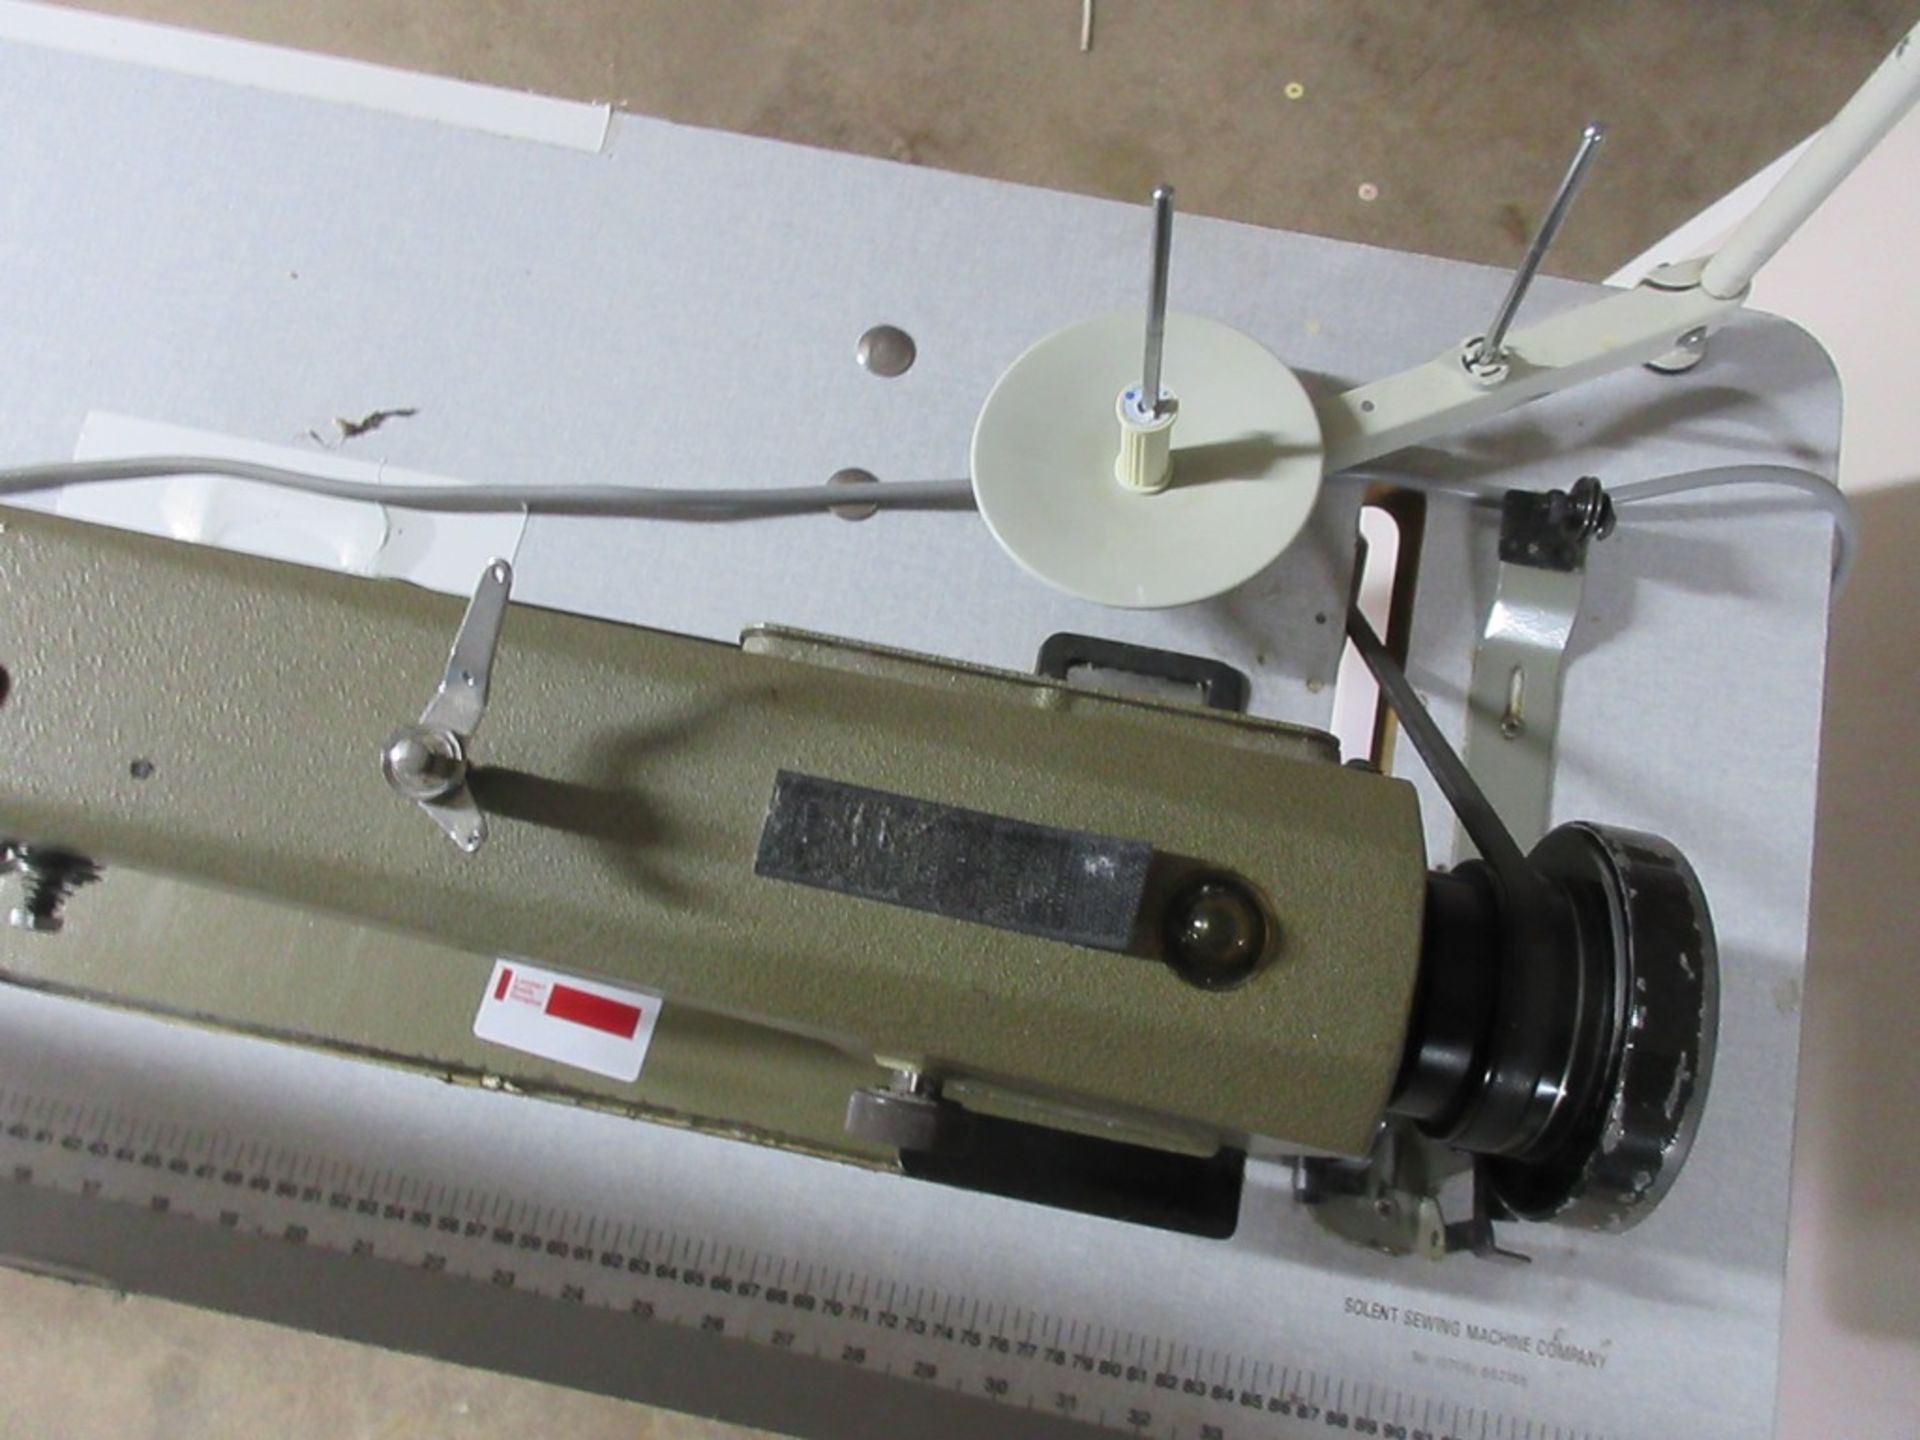 Brother Industries Ltd B755-MKIII flat bed sewing machine, 240v - Image 3 of 4